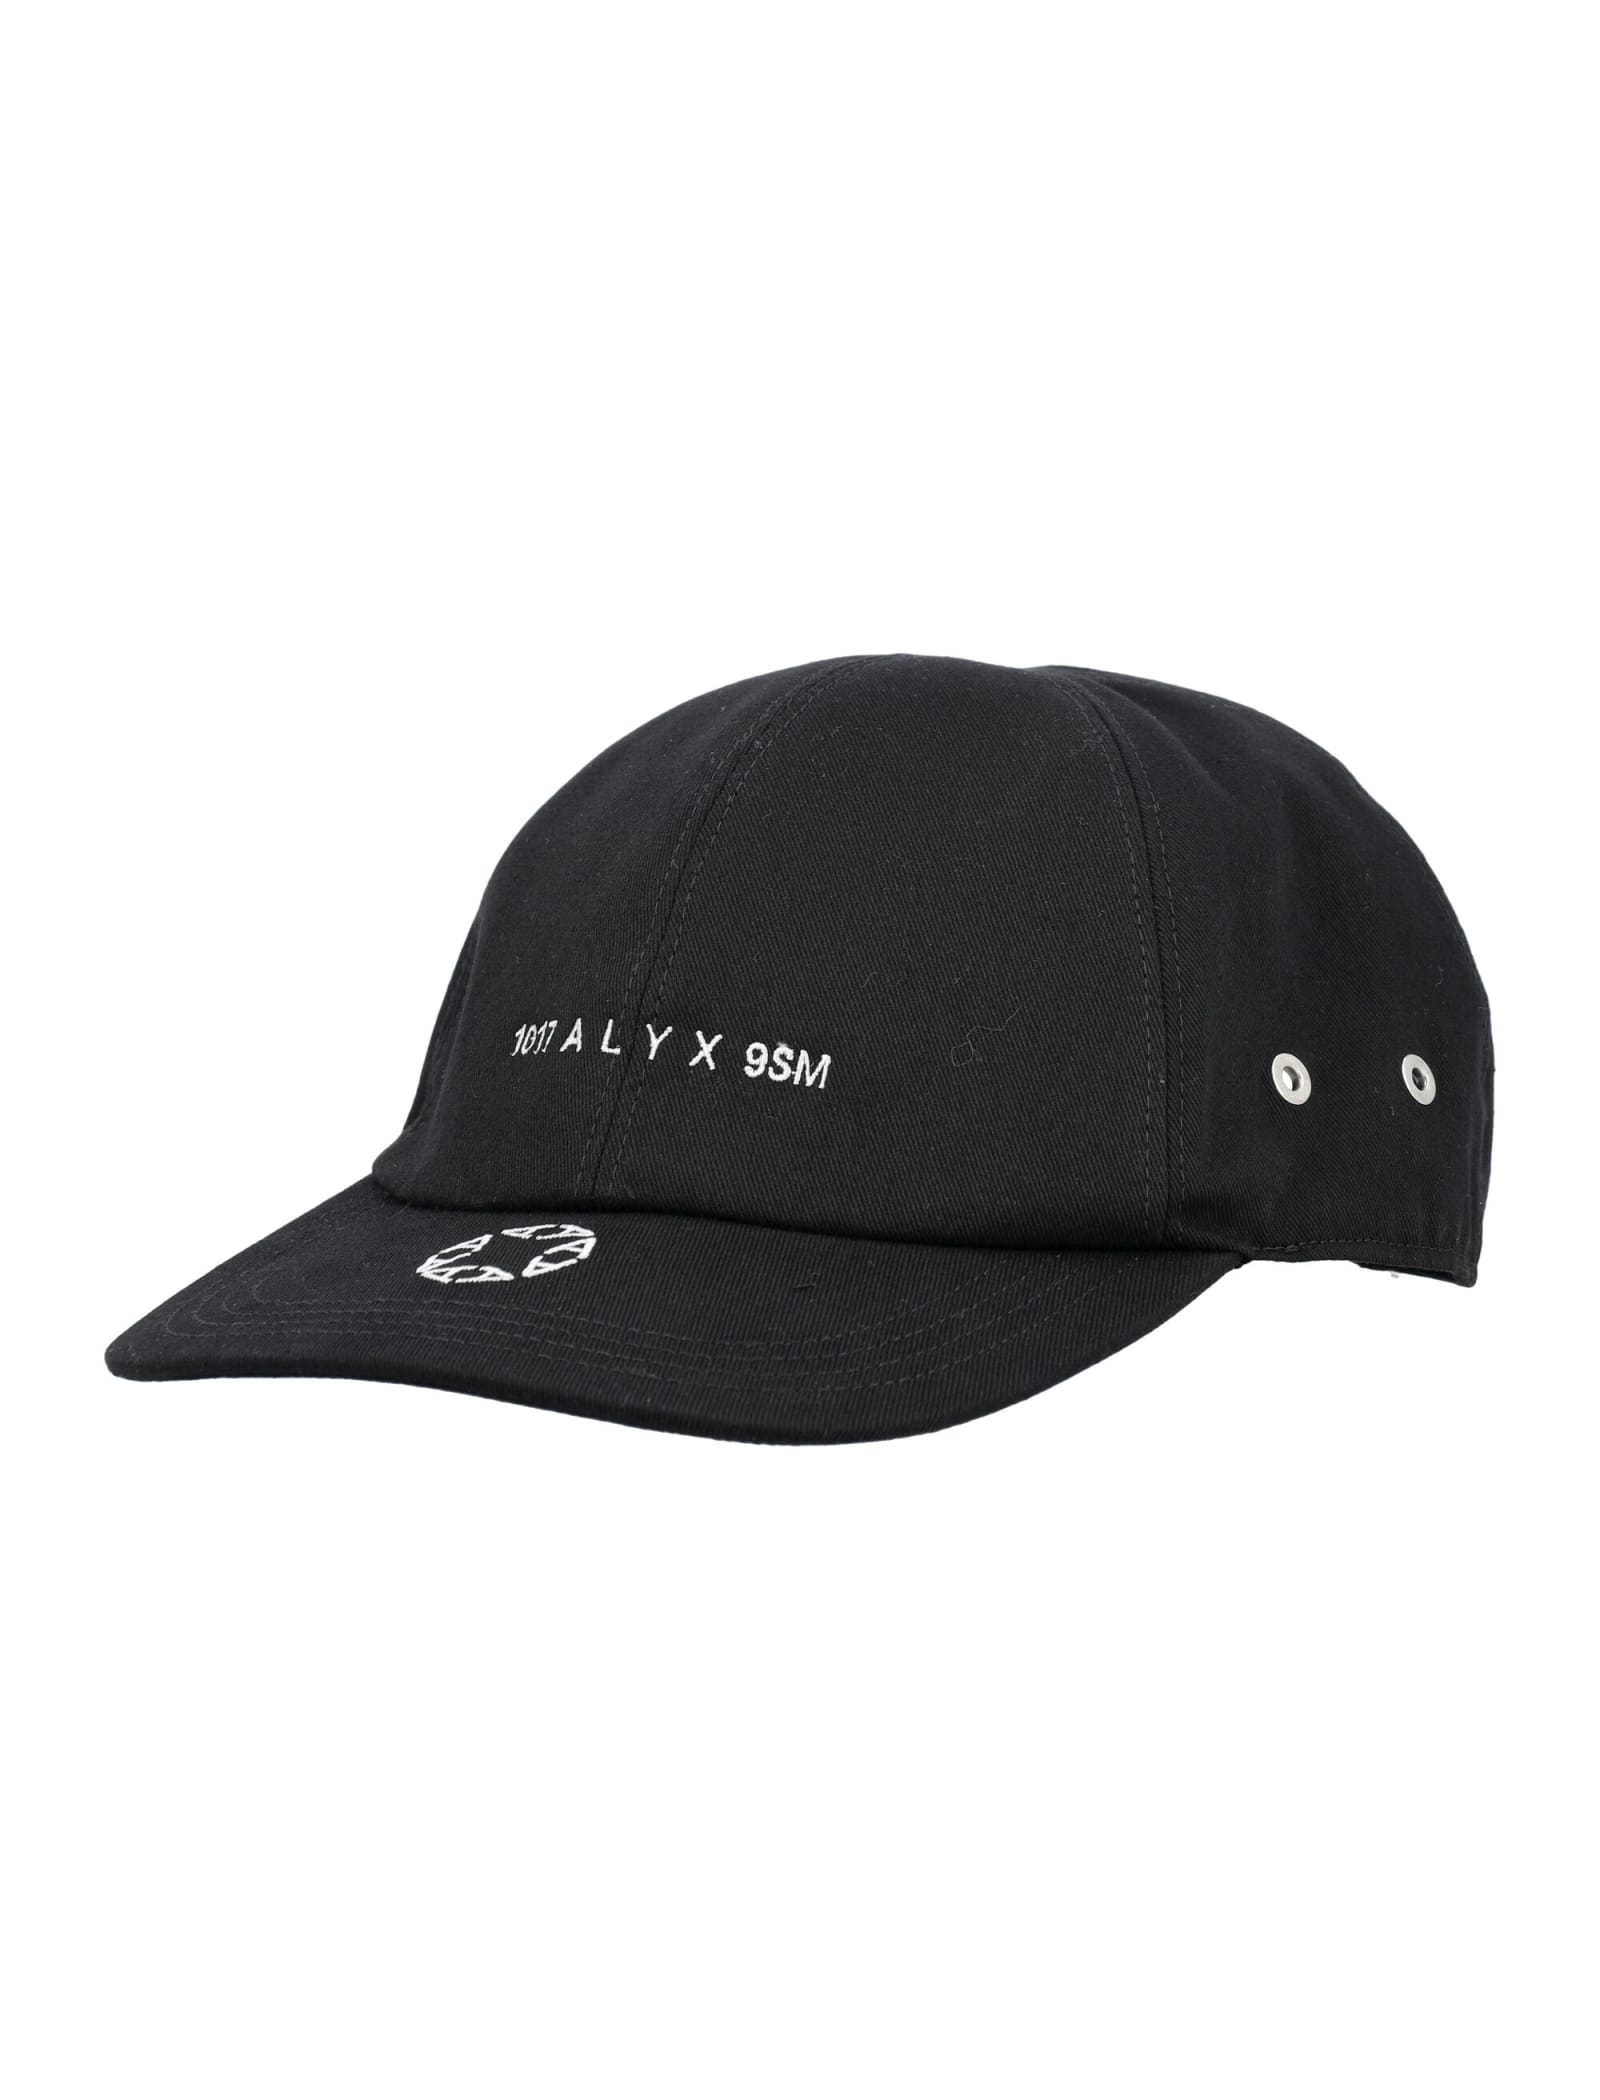 ALYX LOGO EMBROIDERY HAT